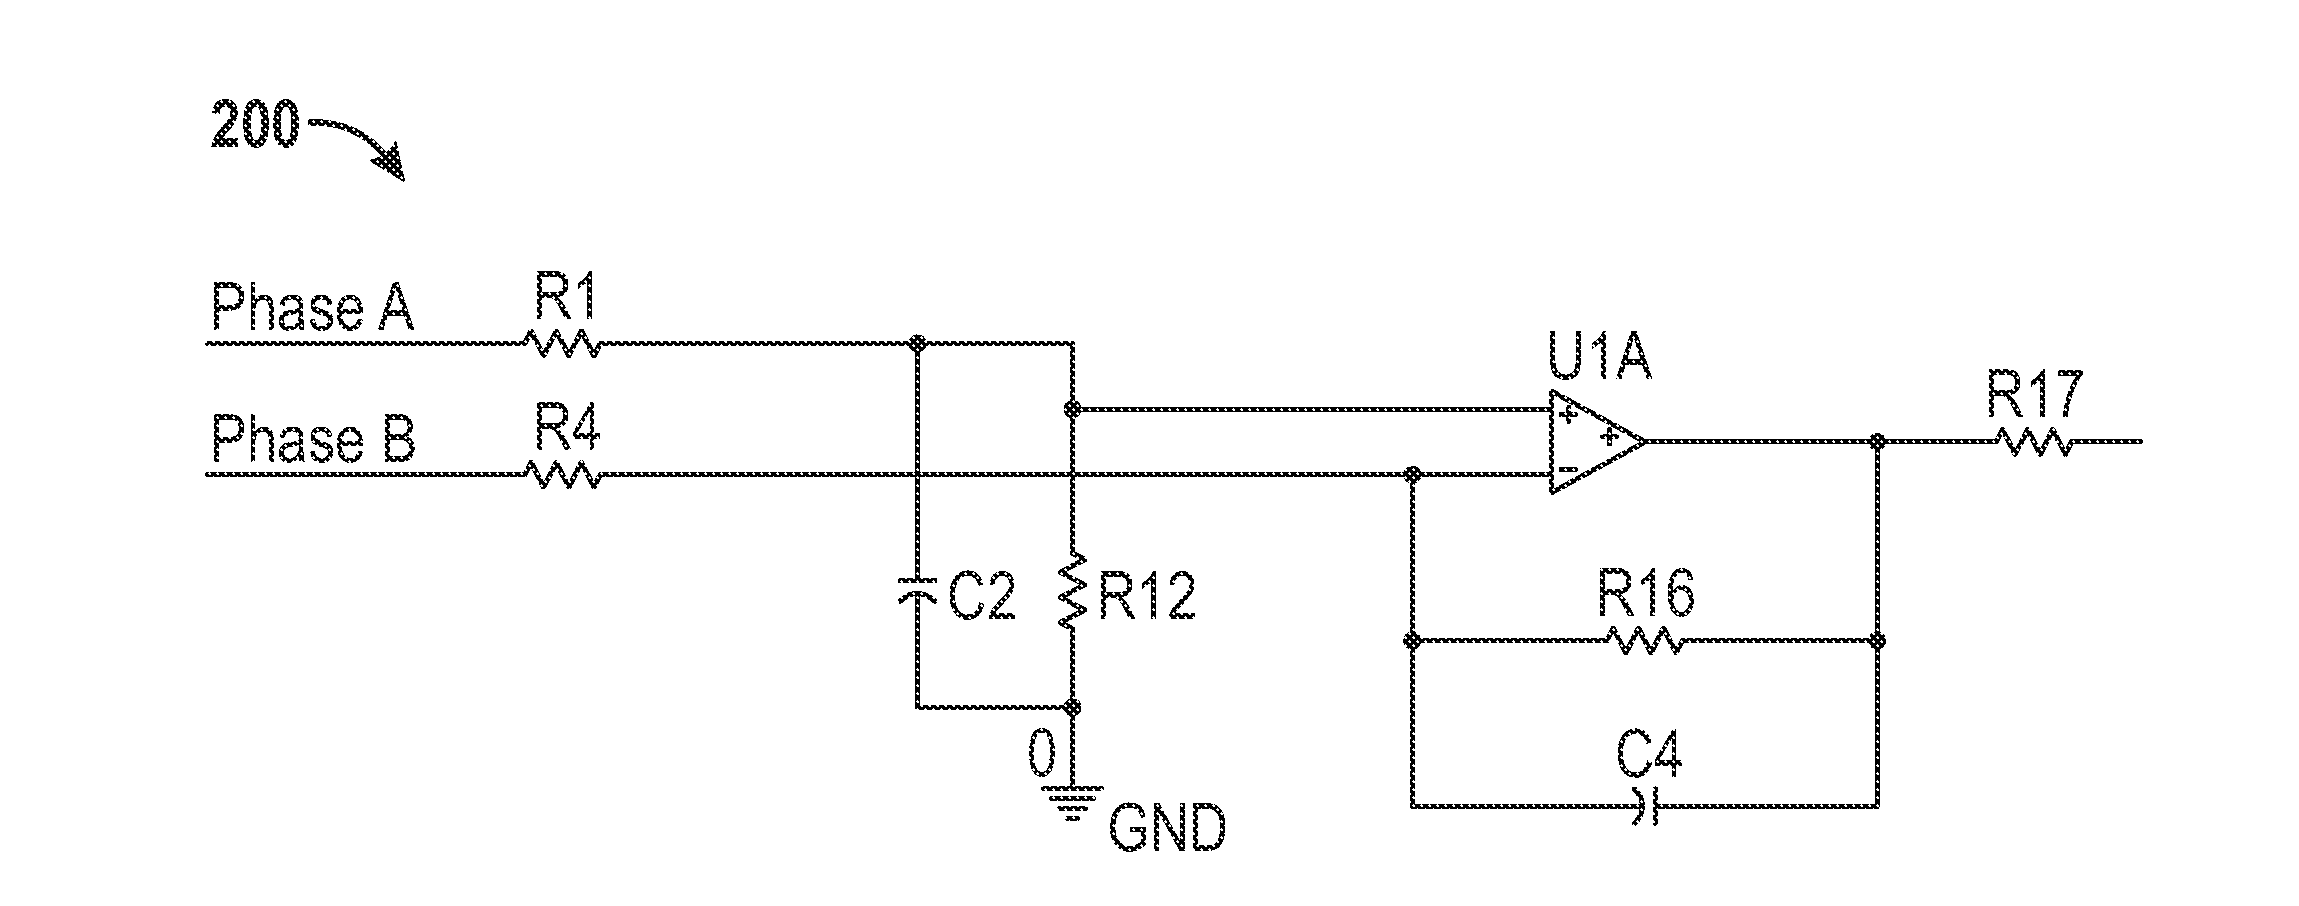 Frequency phase detection three phase system